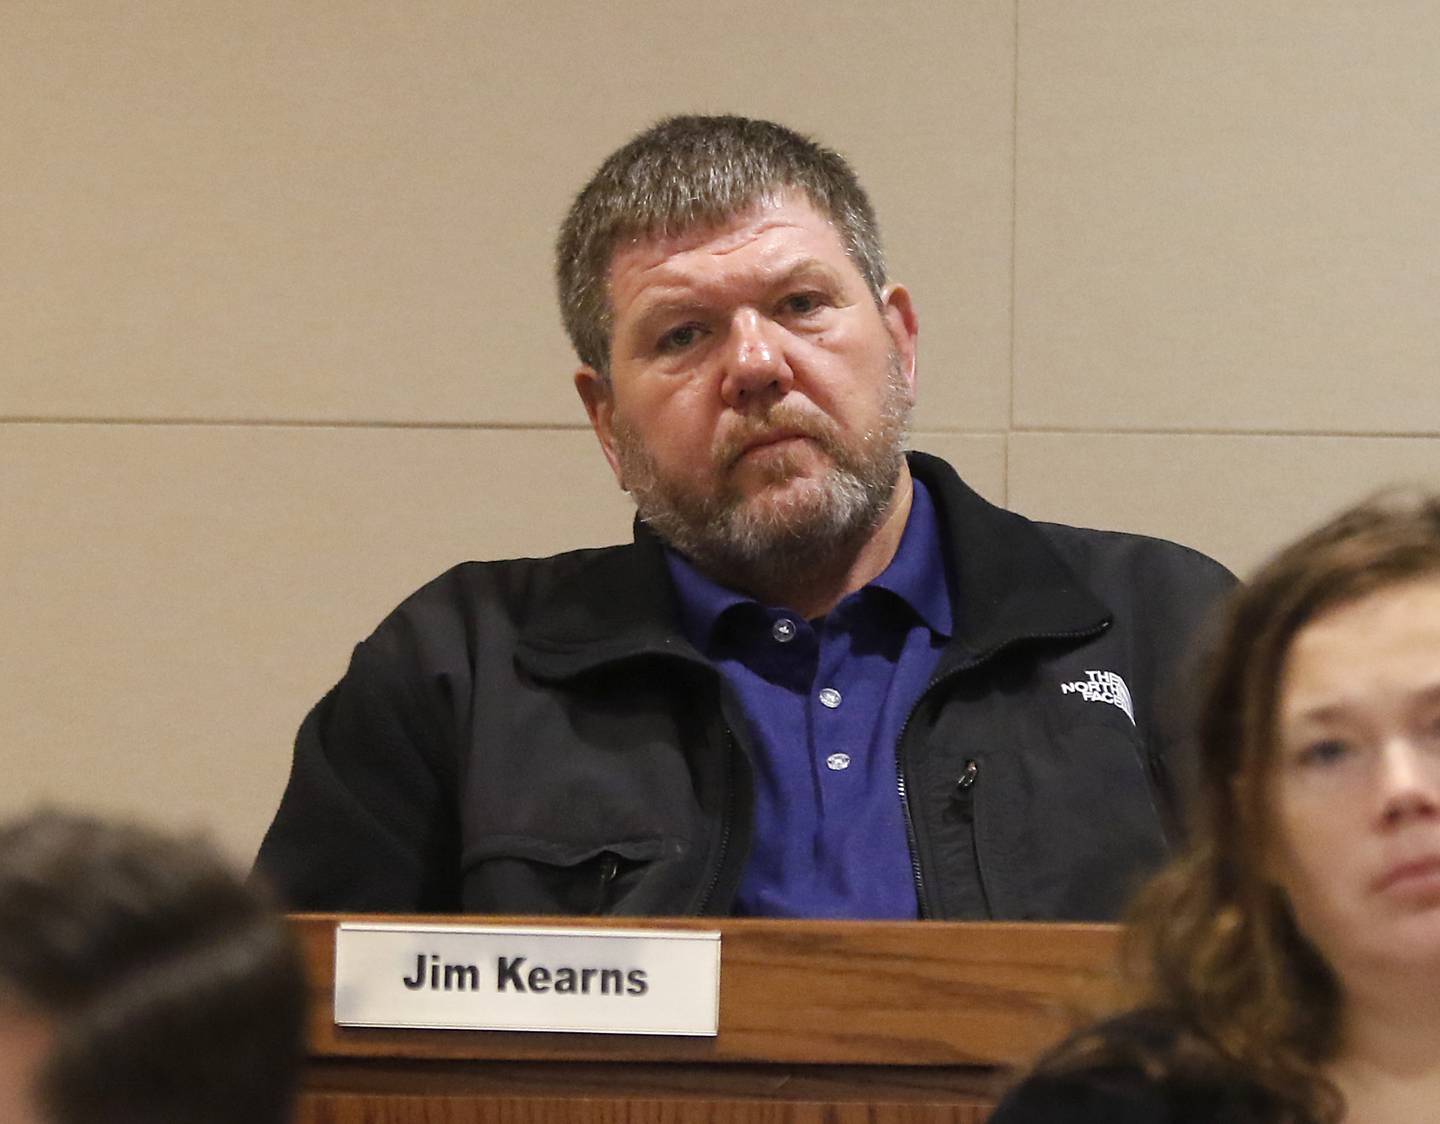 McHenry County Board member Jim Kearns listens to a speaker during a McHenry County Board Committee of the Whole meeting Thursday, Dec. 15, 2022, in the McHenry County Administration Building in Woodstock.